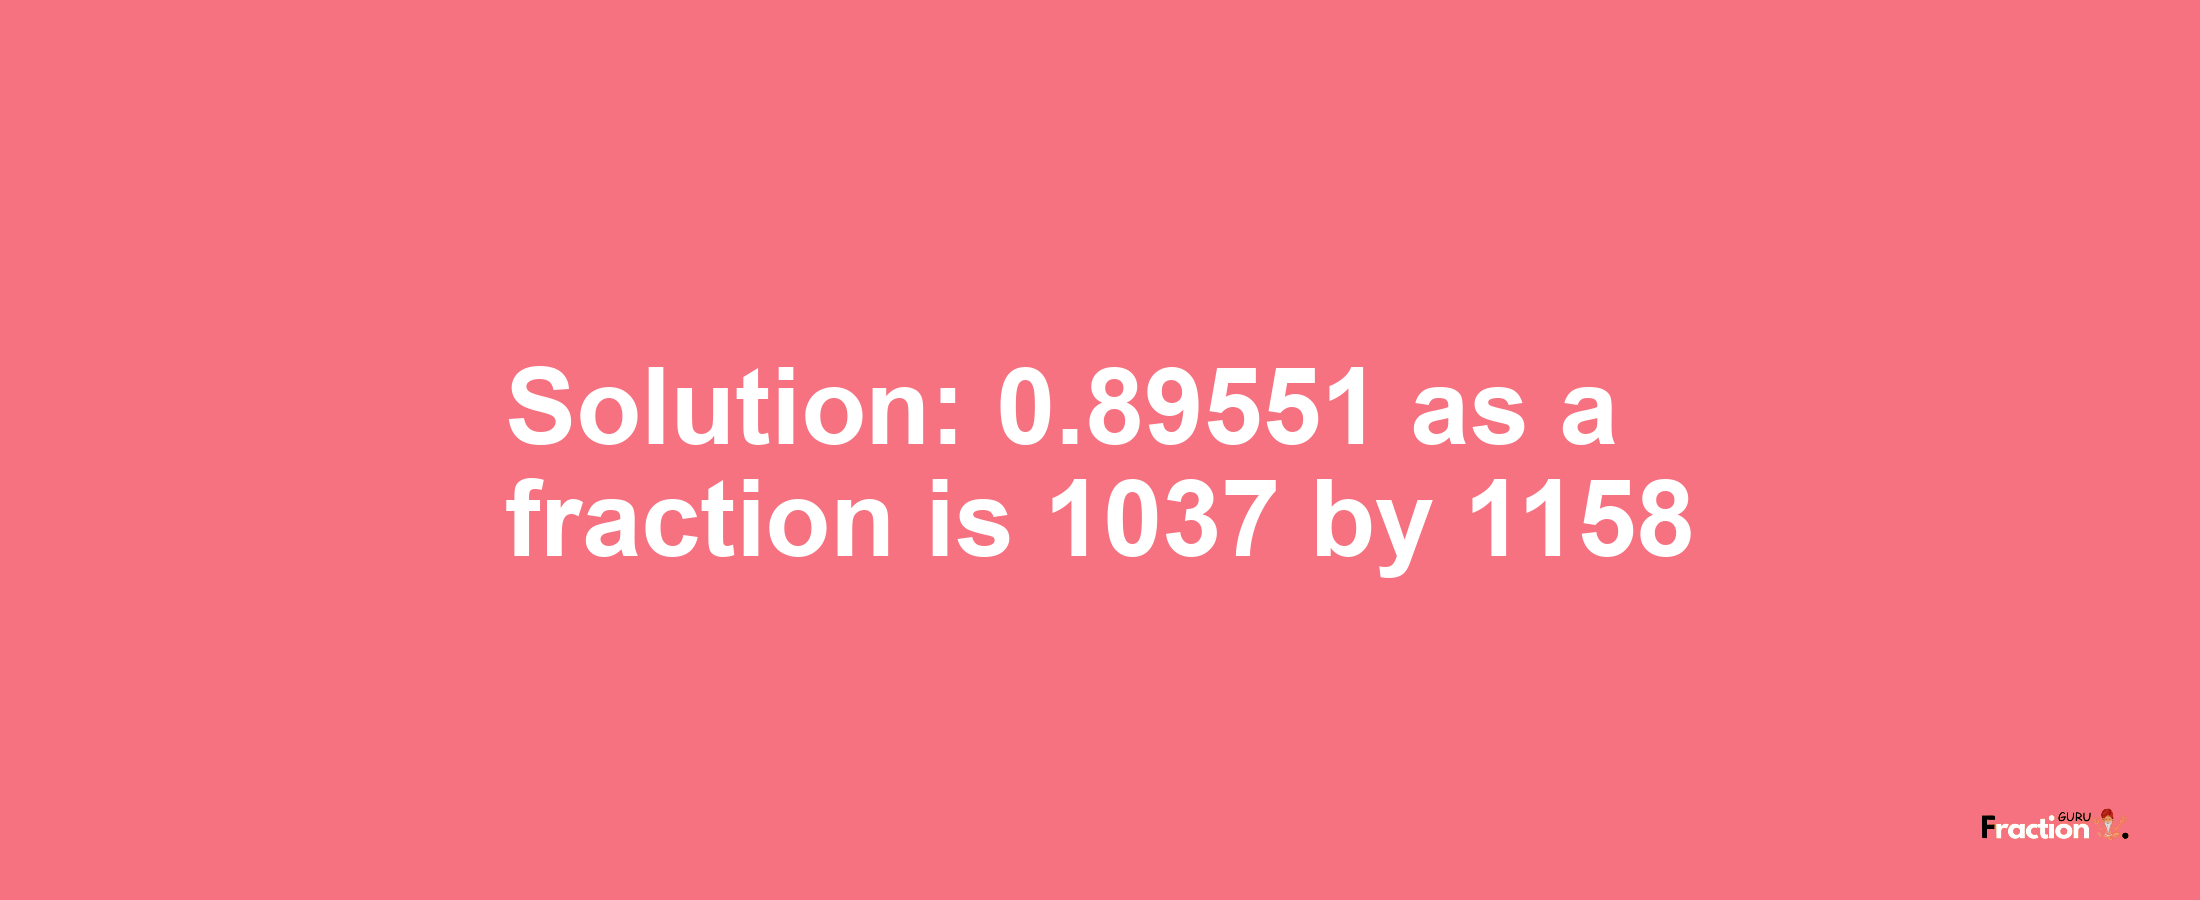 Solution:0.89551 as a fraction is 1037/1158